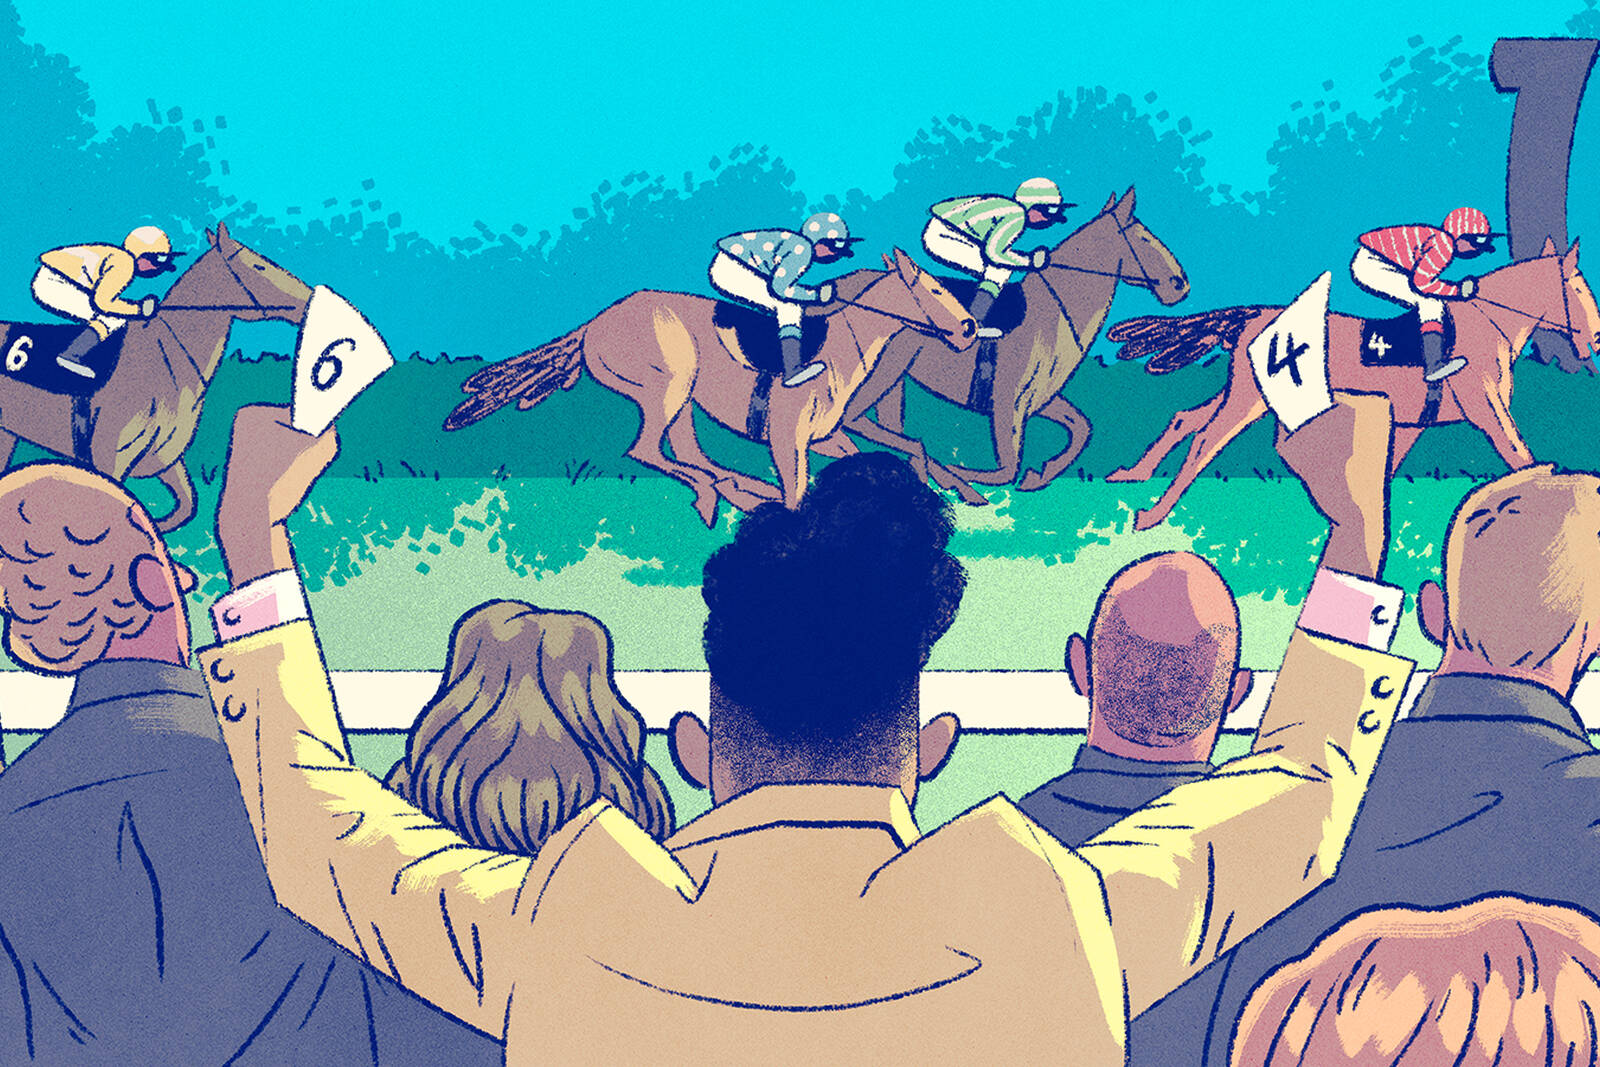 Man cheers on first and last horses in race